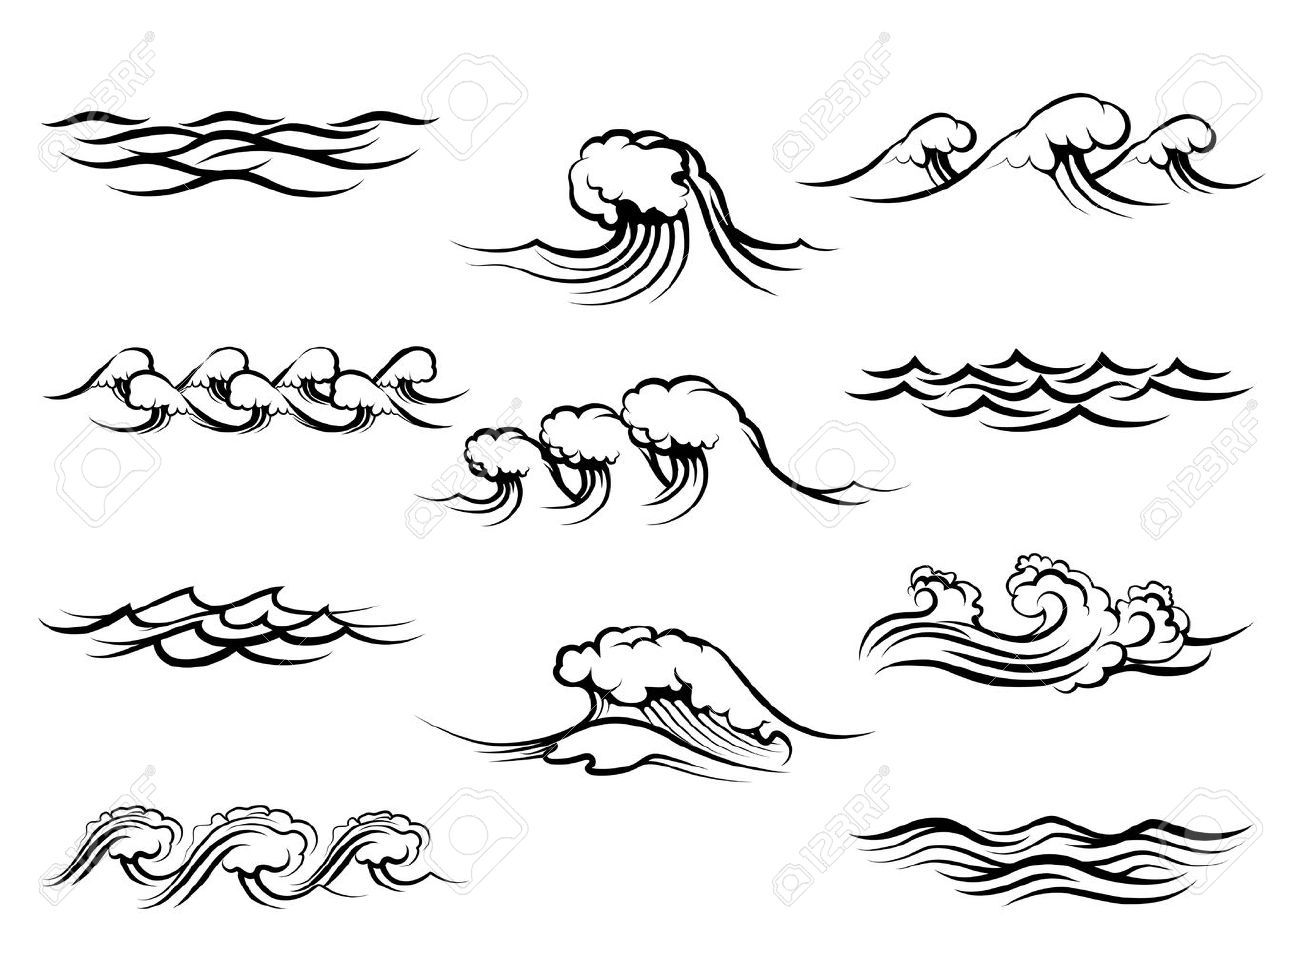 Ocean wave clipart black and white 4 » Clipart Portal.